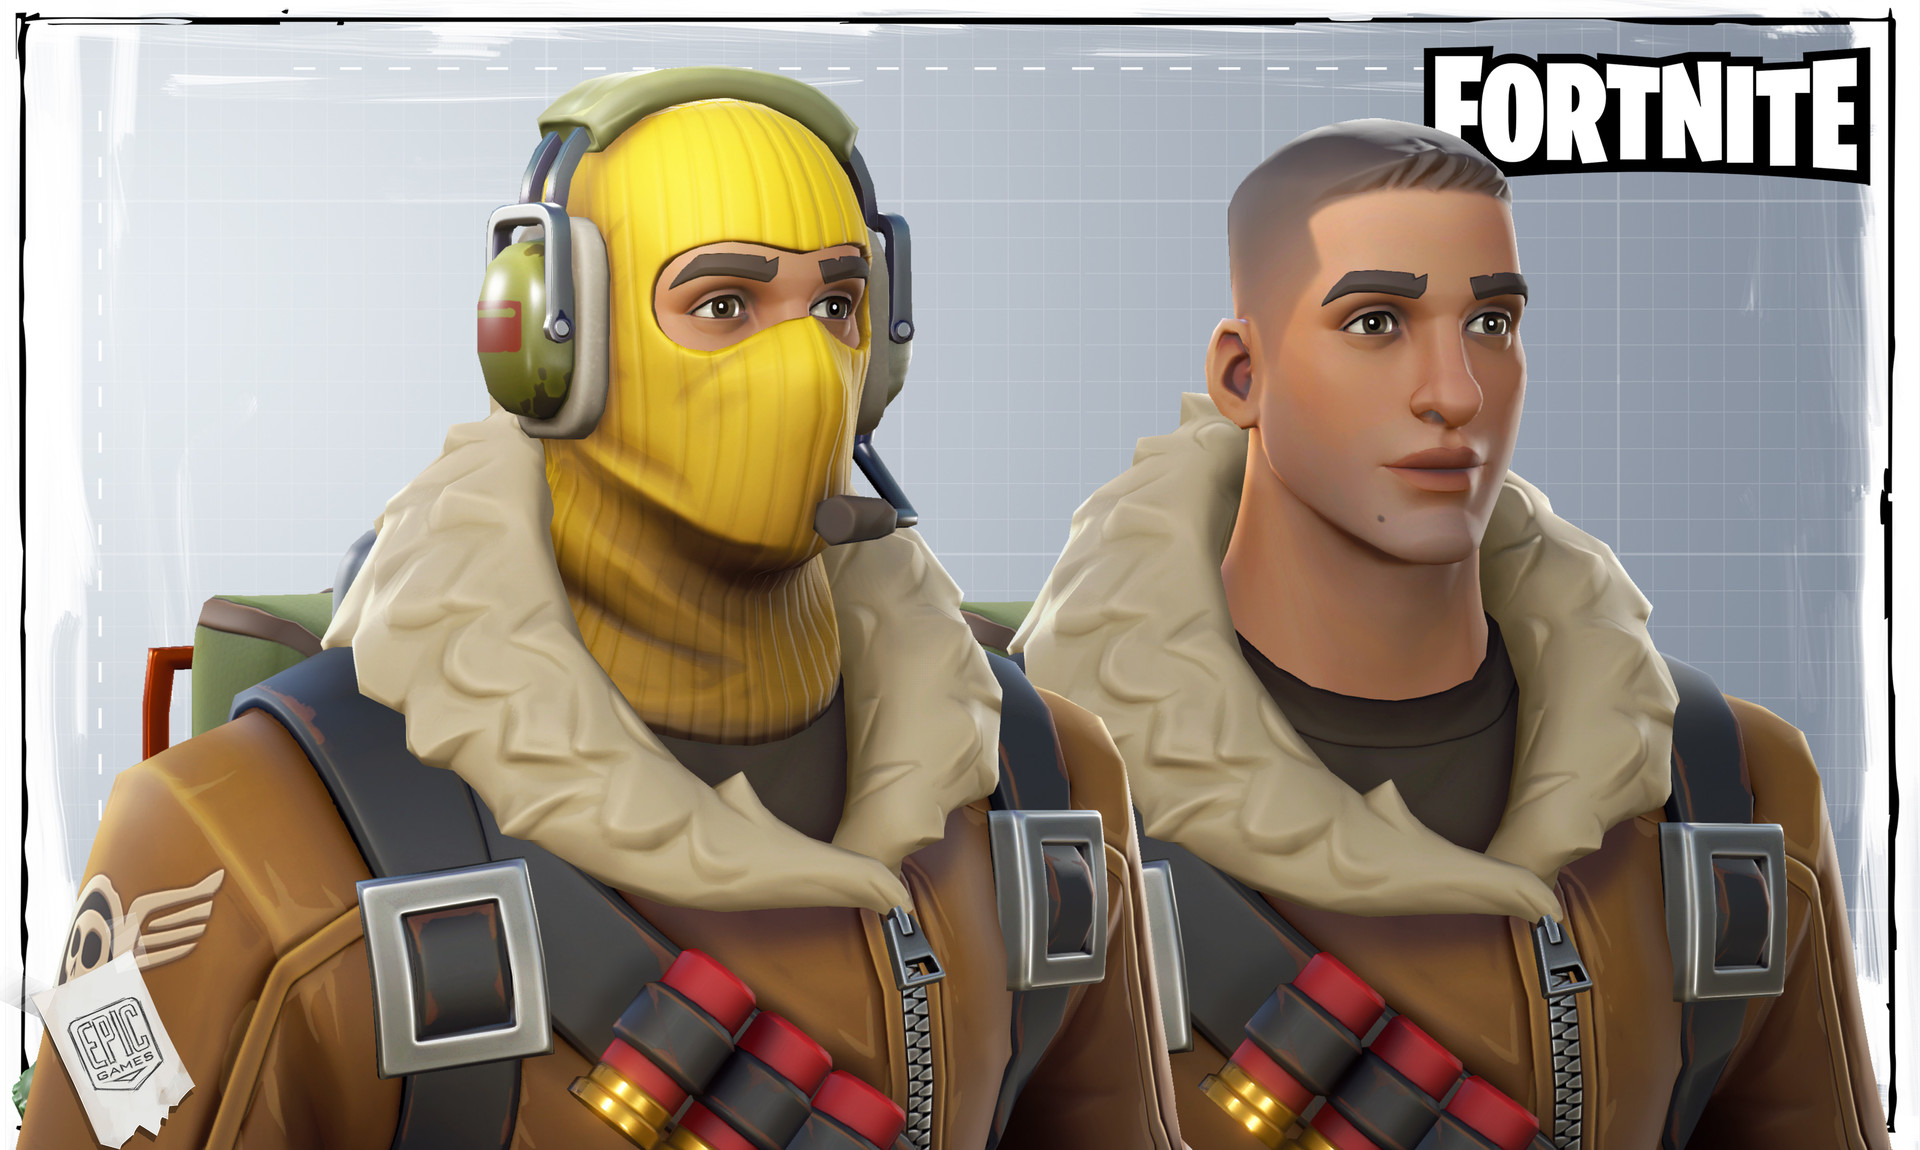 The Raptor skin guy is not one of the normal characters in ...